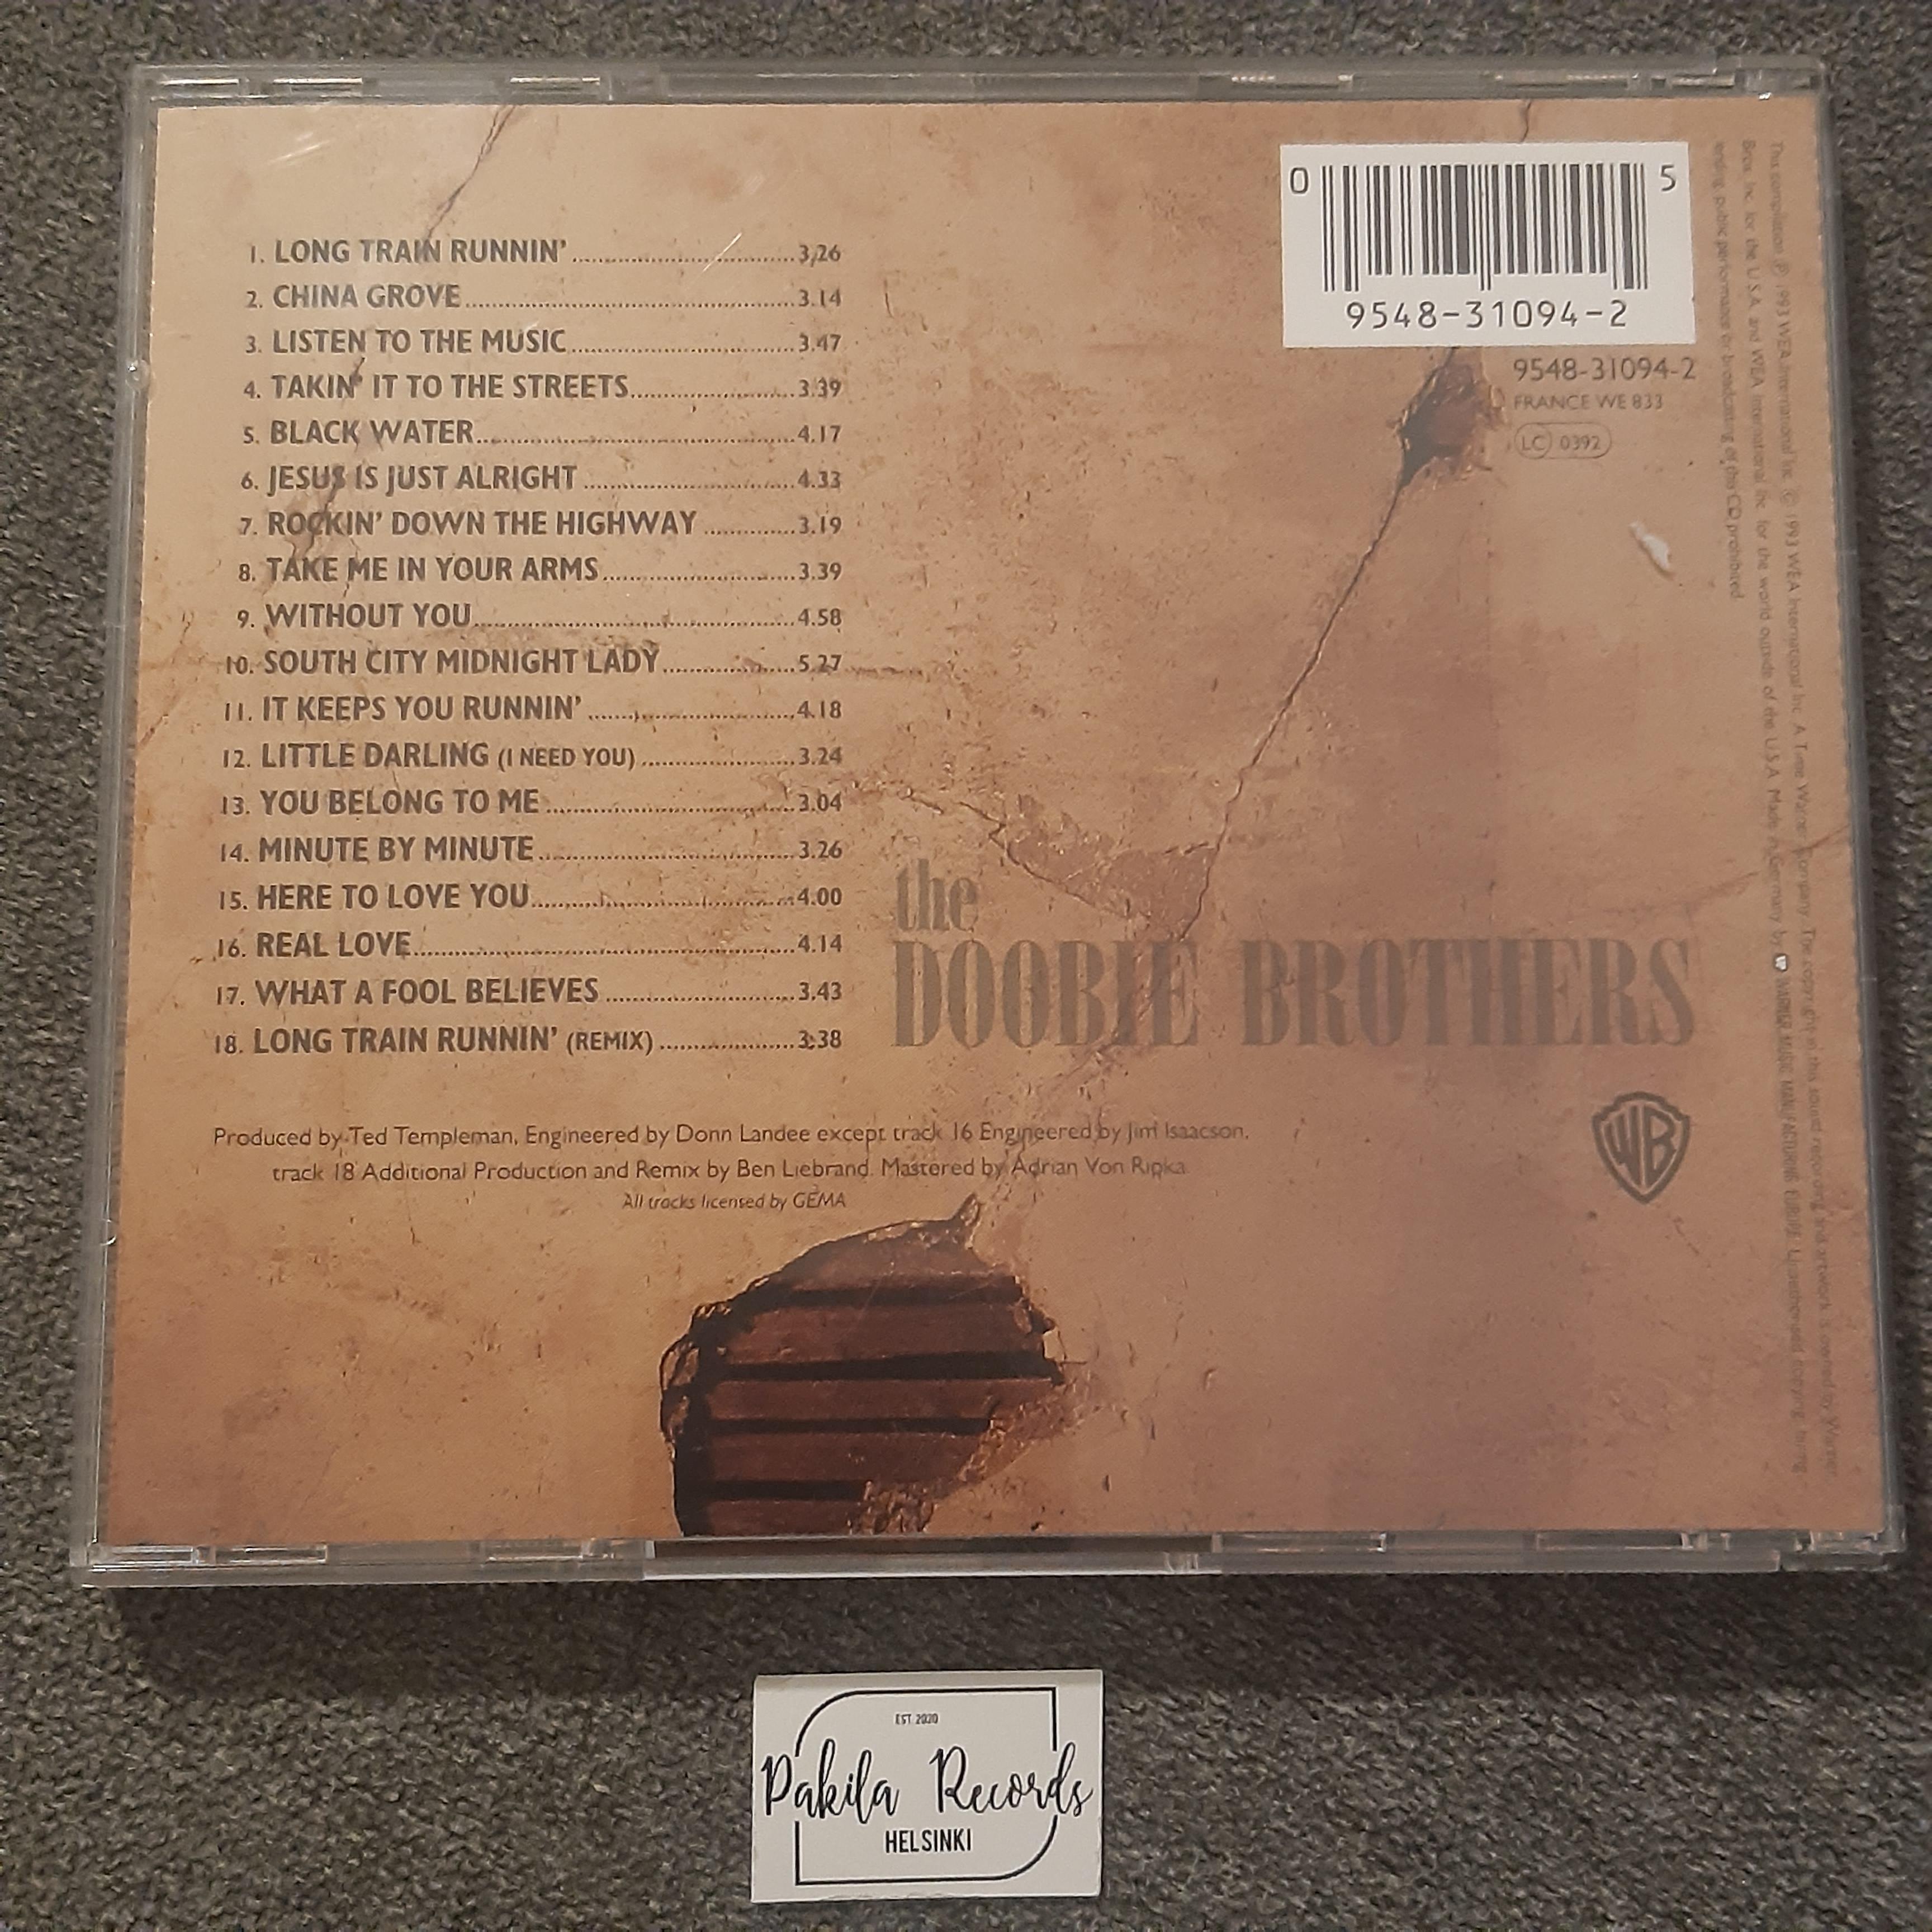 Doobie Brothers - Listen To The Music, The Very Best Of The Doobie Brothers - CD (käytetty)